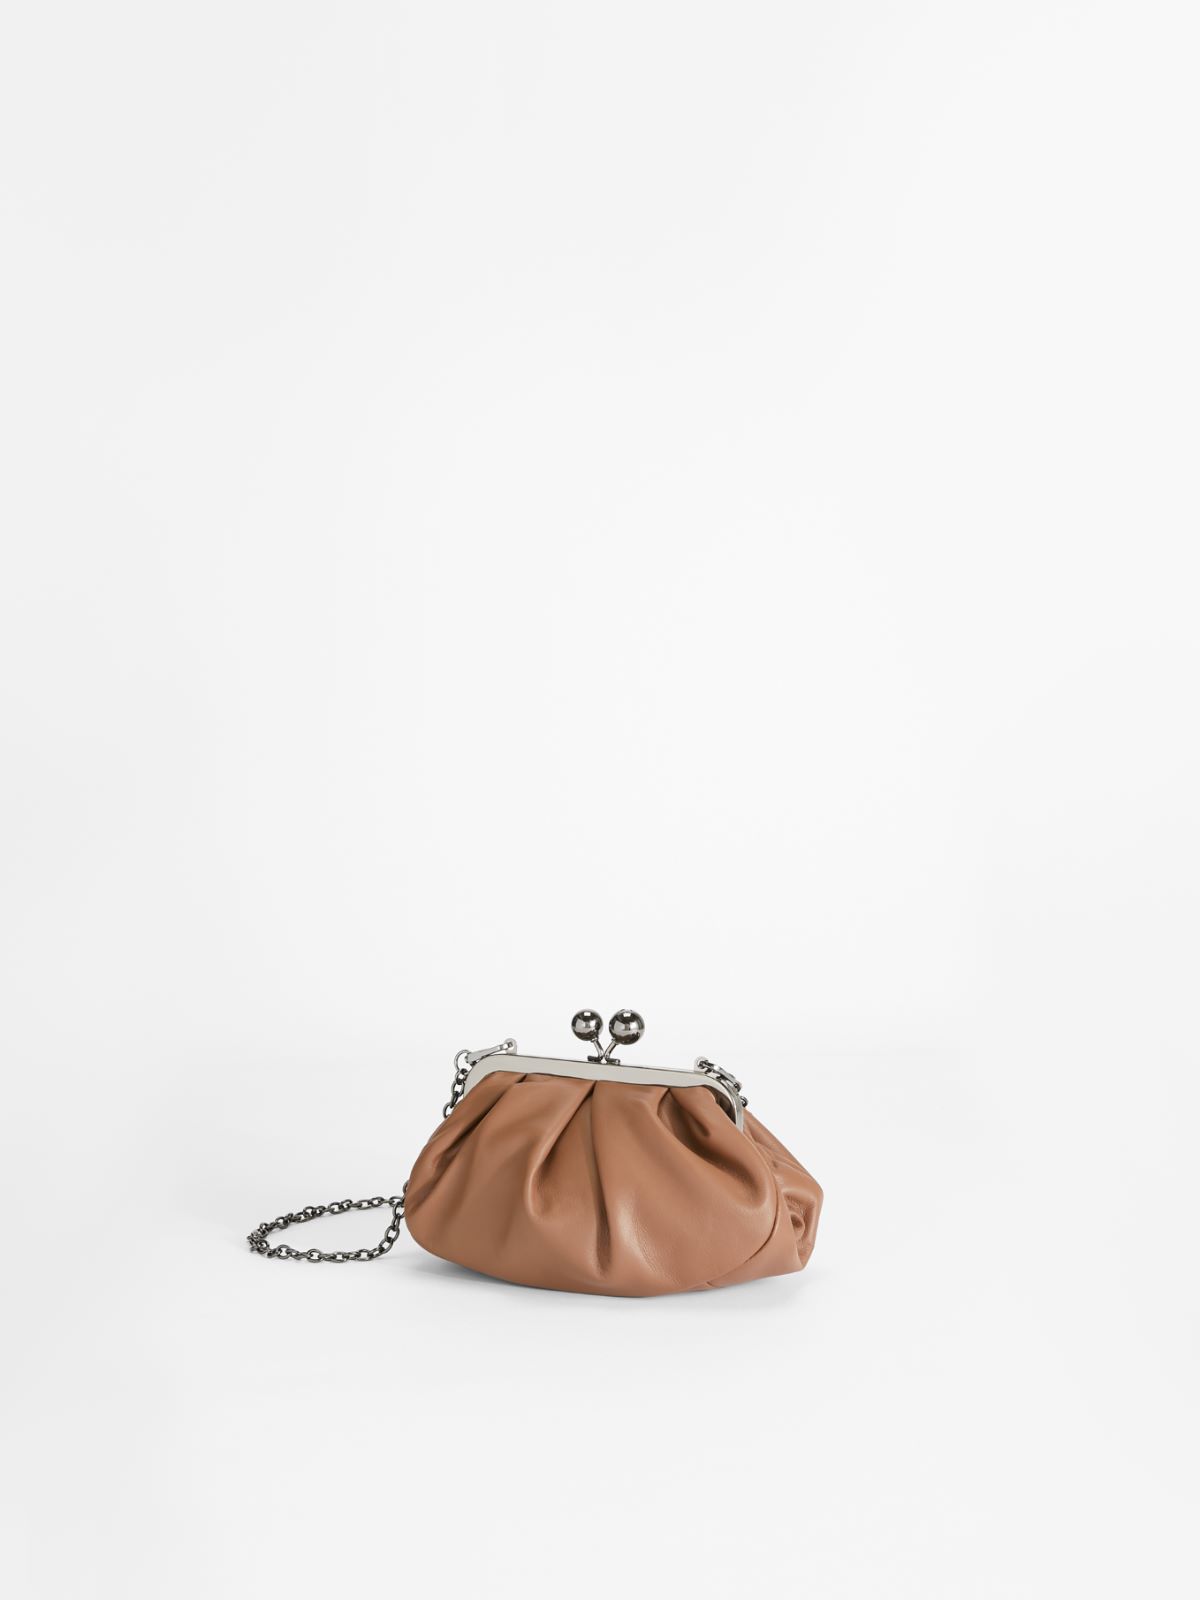 Small leather Pasticcino Bag - TOBACCO - Weekend Max Mara - 2